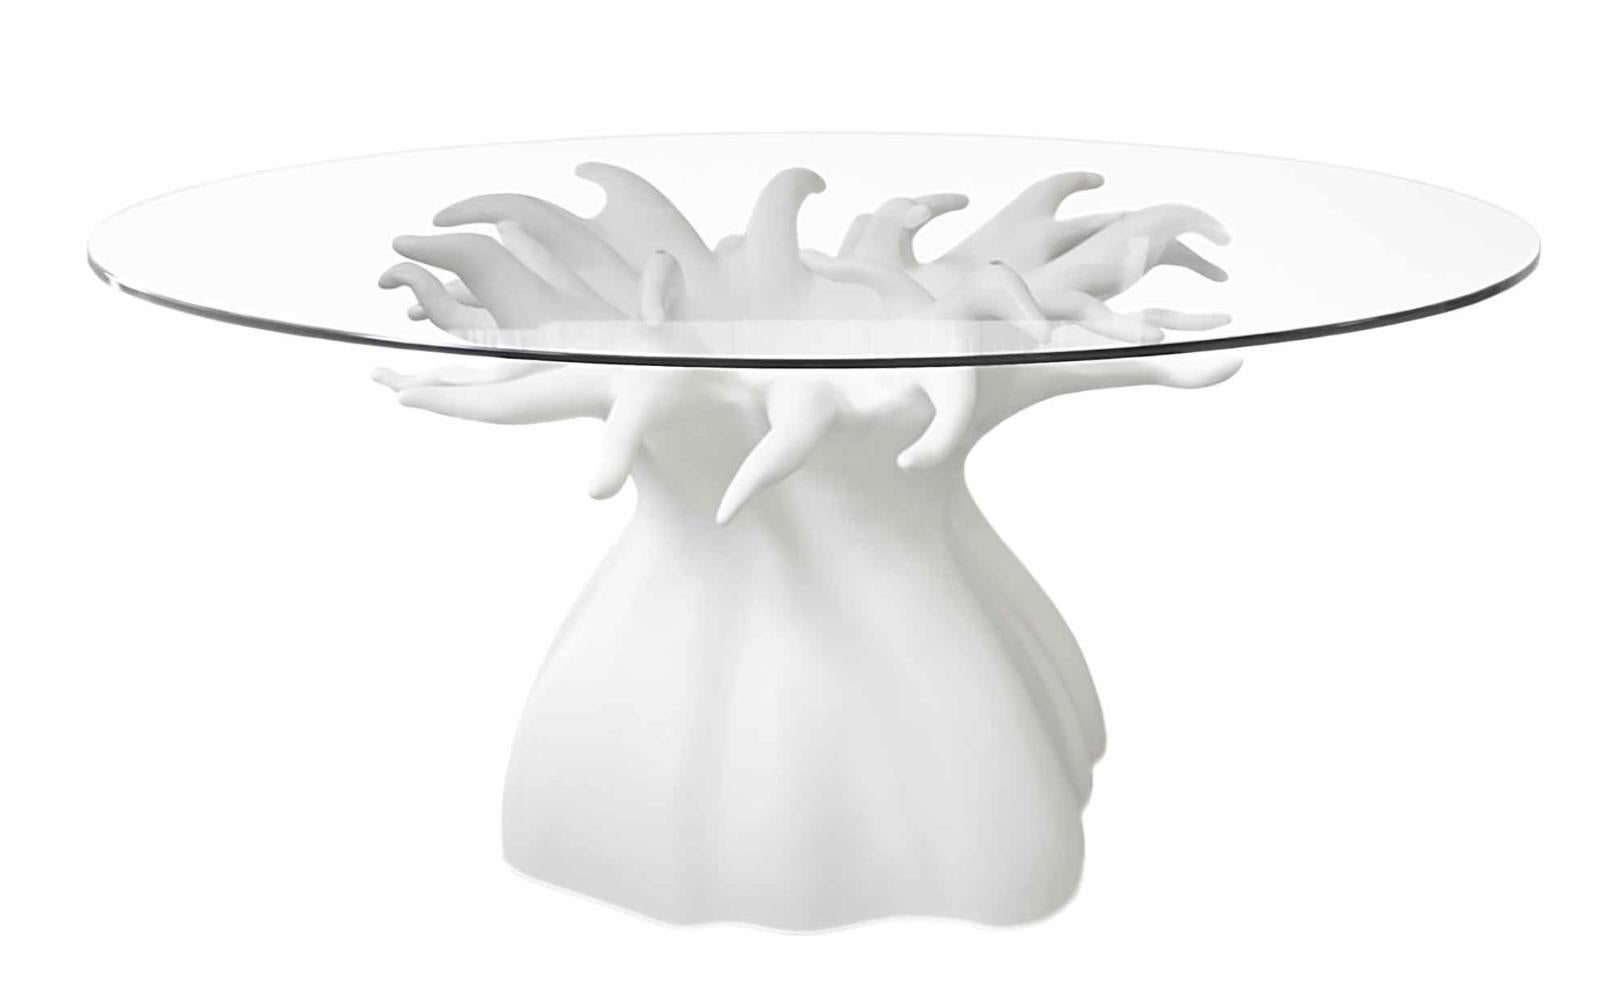 Dining table

General Information
Dimensions (cm): Ø160 x 75
Dimensions (in): Ø63 x 29.5
Seats: 8

Materials and Colors
Top: Clear tempered glass 12 mm thick, with polished edge;
Base: Resin reinforced with fiberglass lacquered in white matte.


